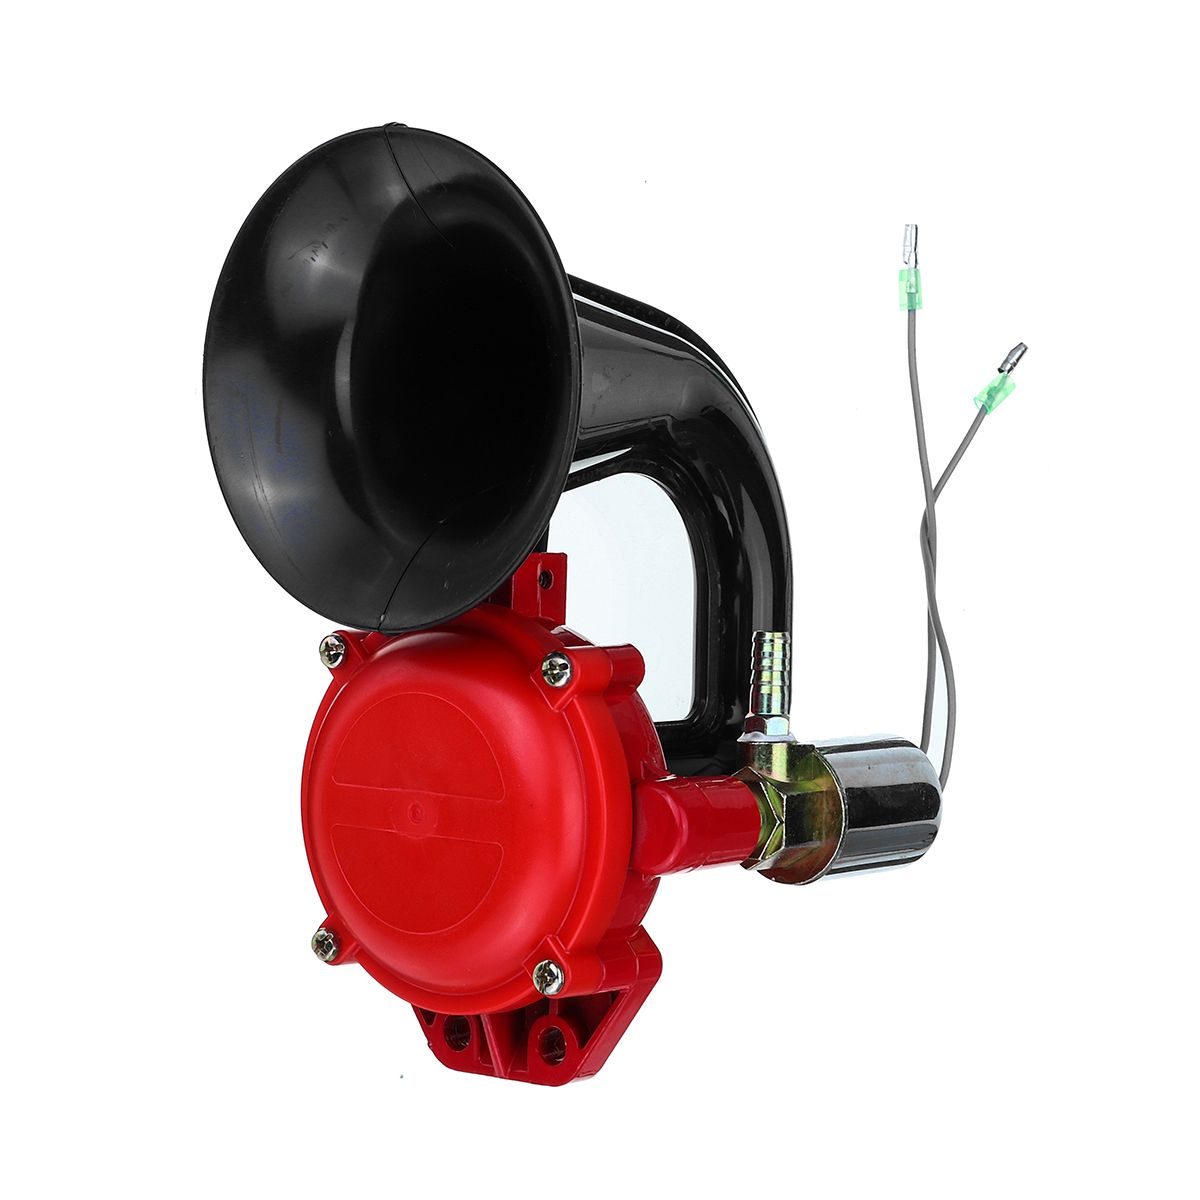 12V-200dB-Super-Loud-Electric-Air-Horn-For-Car-Truck-Motorcycle-1616598